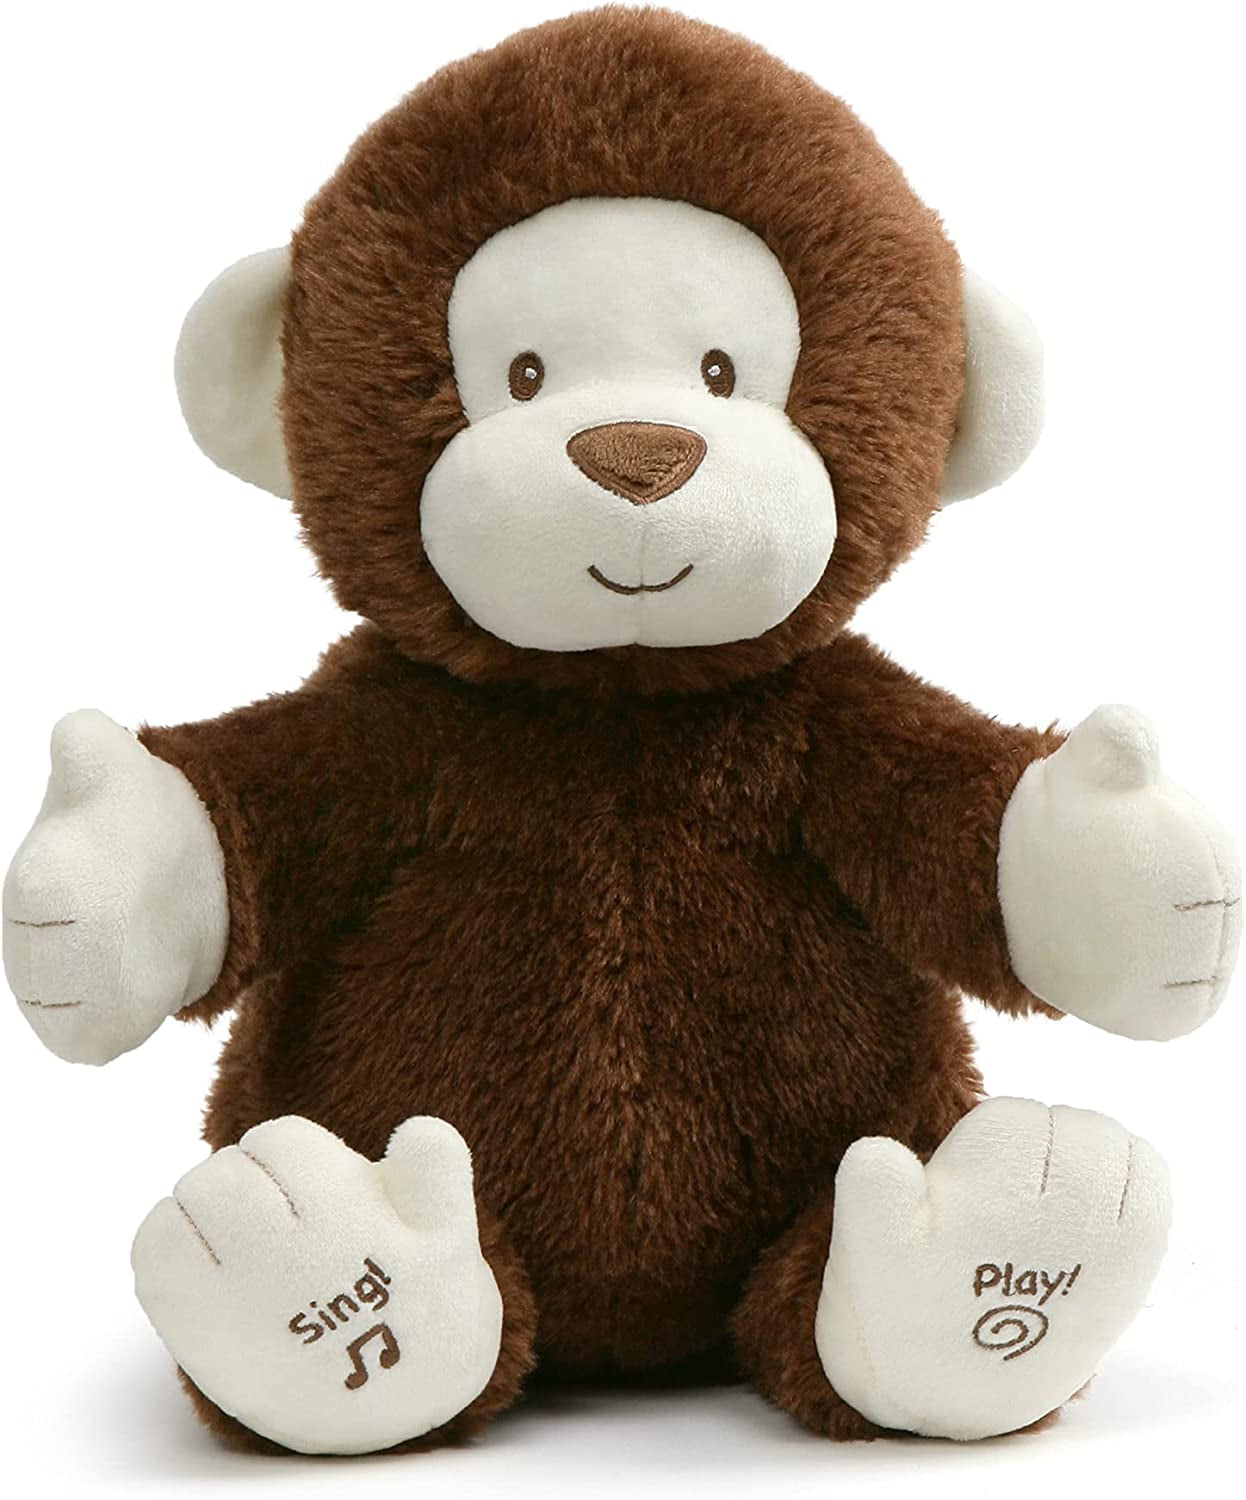 Baby Animated Clappy Monkey Singing and Clapping Plush Stuffed Animal,  Brown, 12